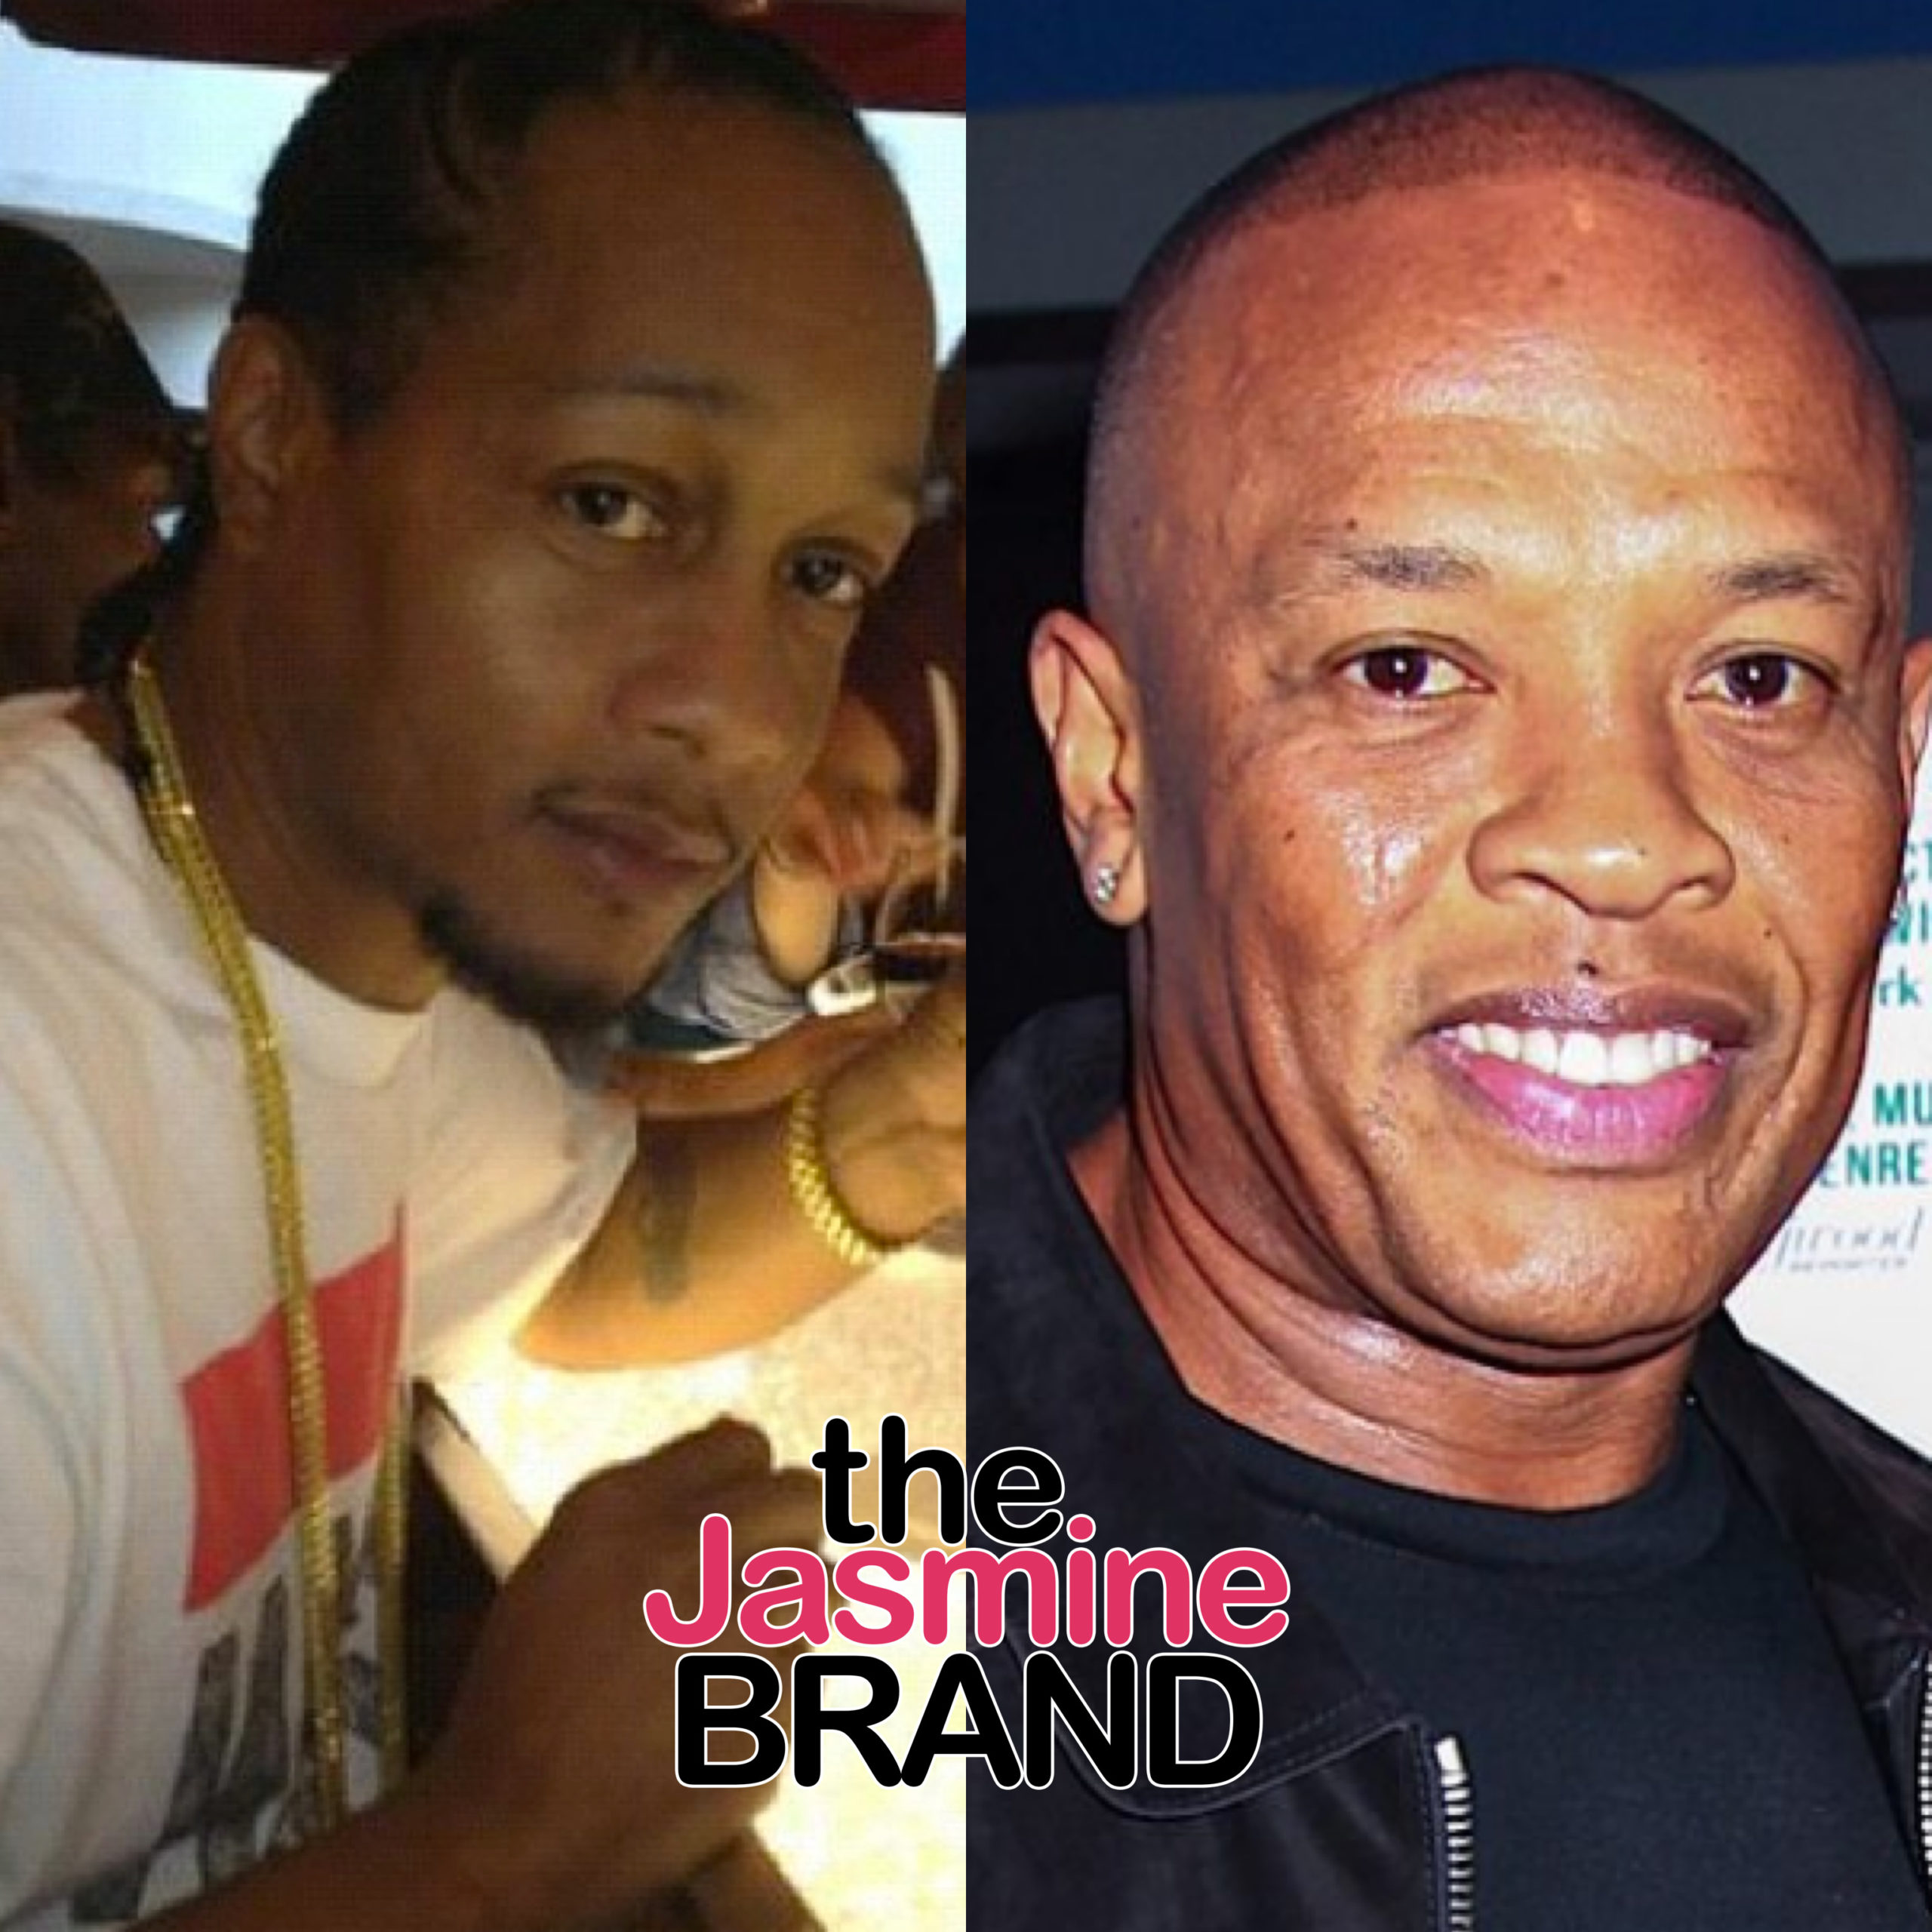 Renni Rucci Freestyle Xnxx Hd - DJ Quik Says He Deserves To Be Where Dr. Dre Is + Shares It's Painful When  People 'Pit' Him Against The Music Mogul - theJasmineBRAND